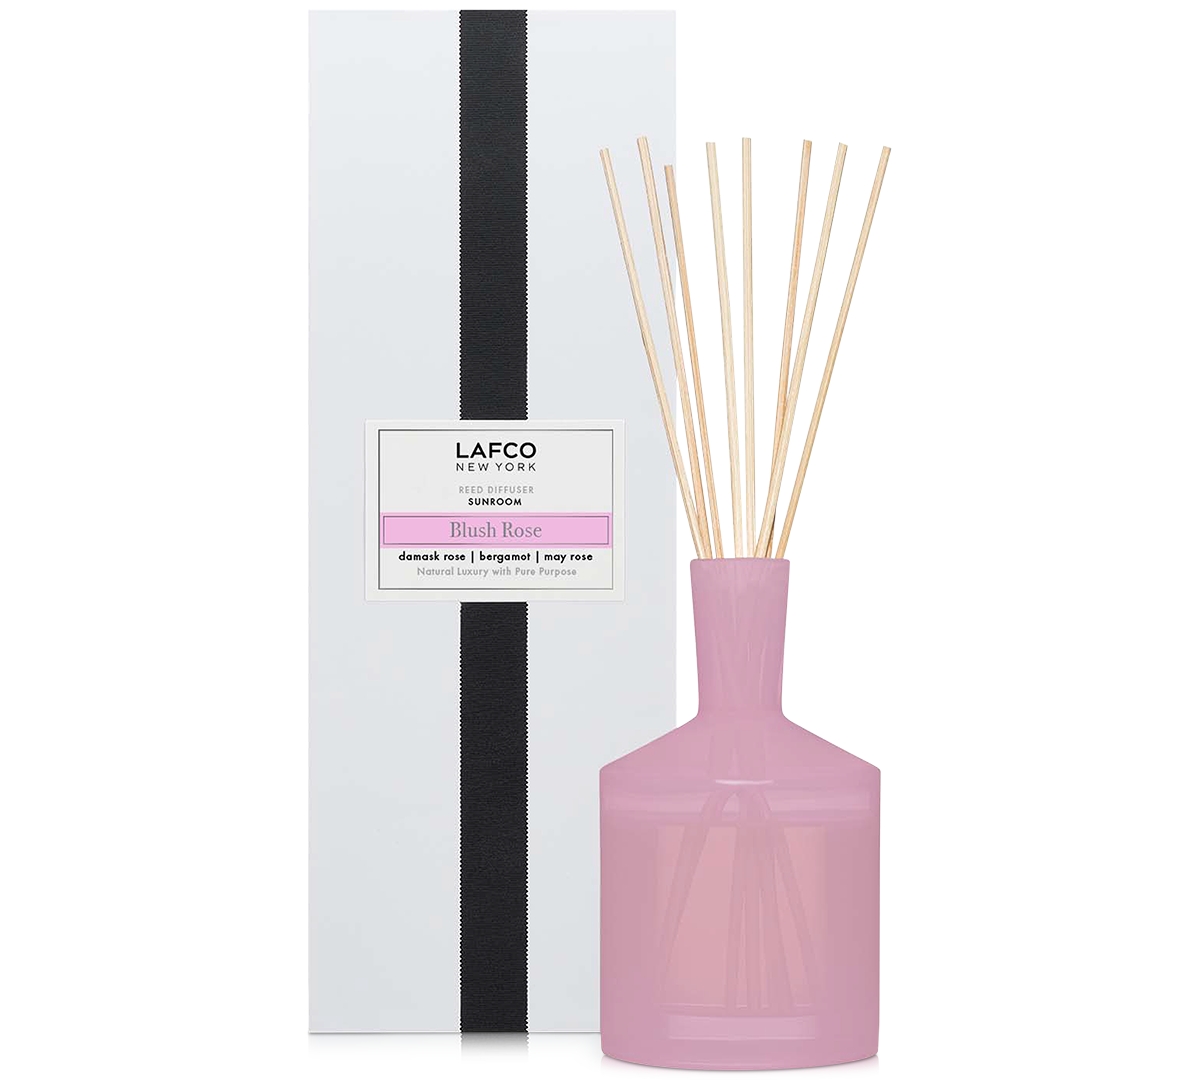 Lafco New York Blush Rose Classic Reed Diffuser, 6 Oz.